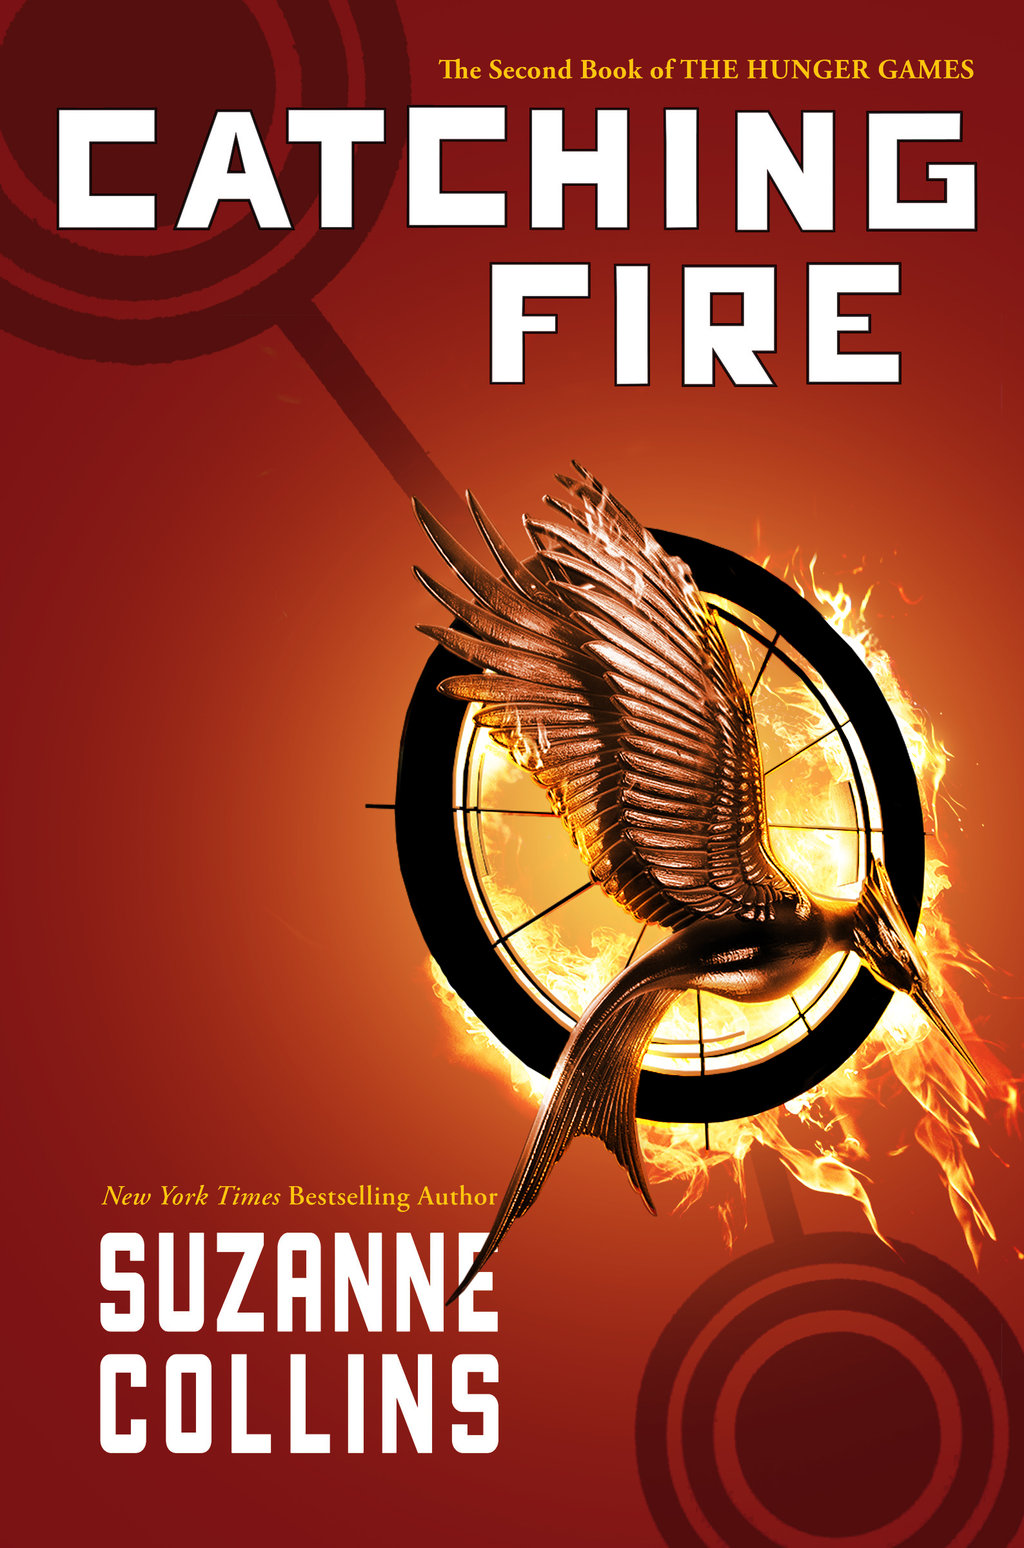 the-hunger-games-2-audiobook-catching-fire